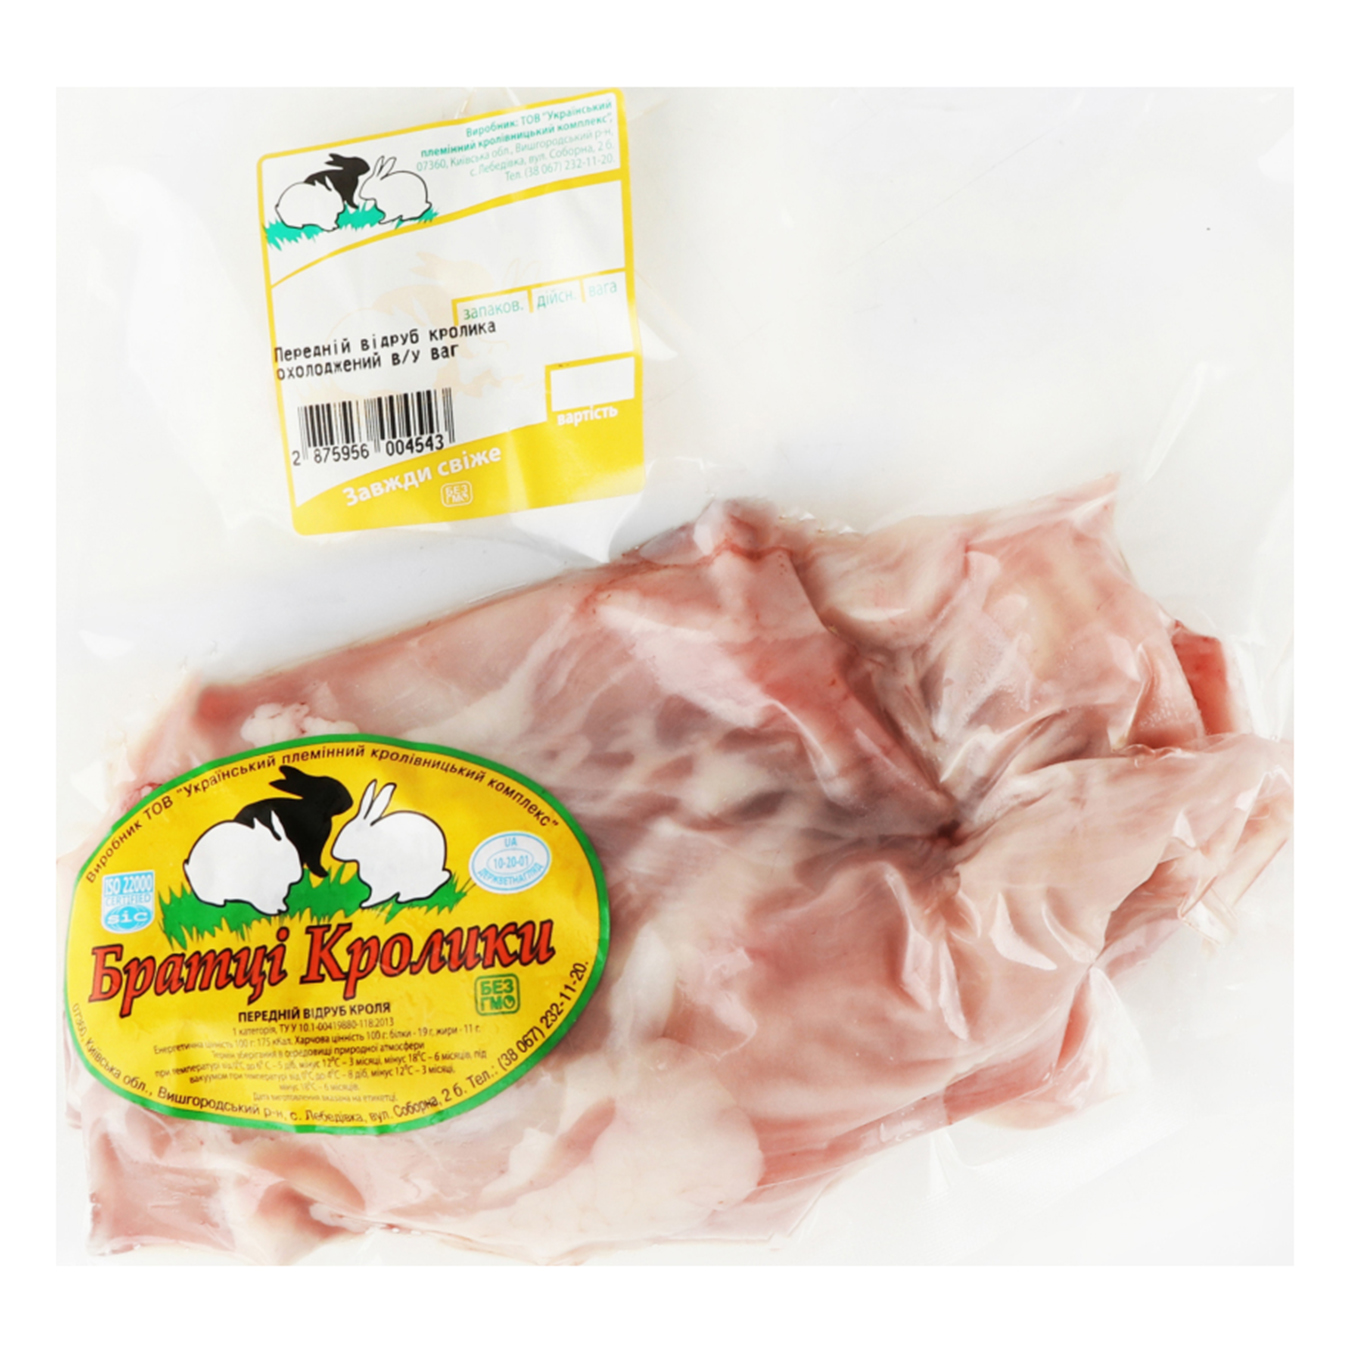 Brattsi Krolyky front cut rabbit chilled 500-600 grams per package